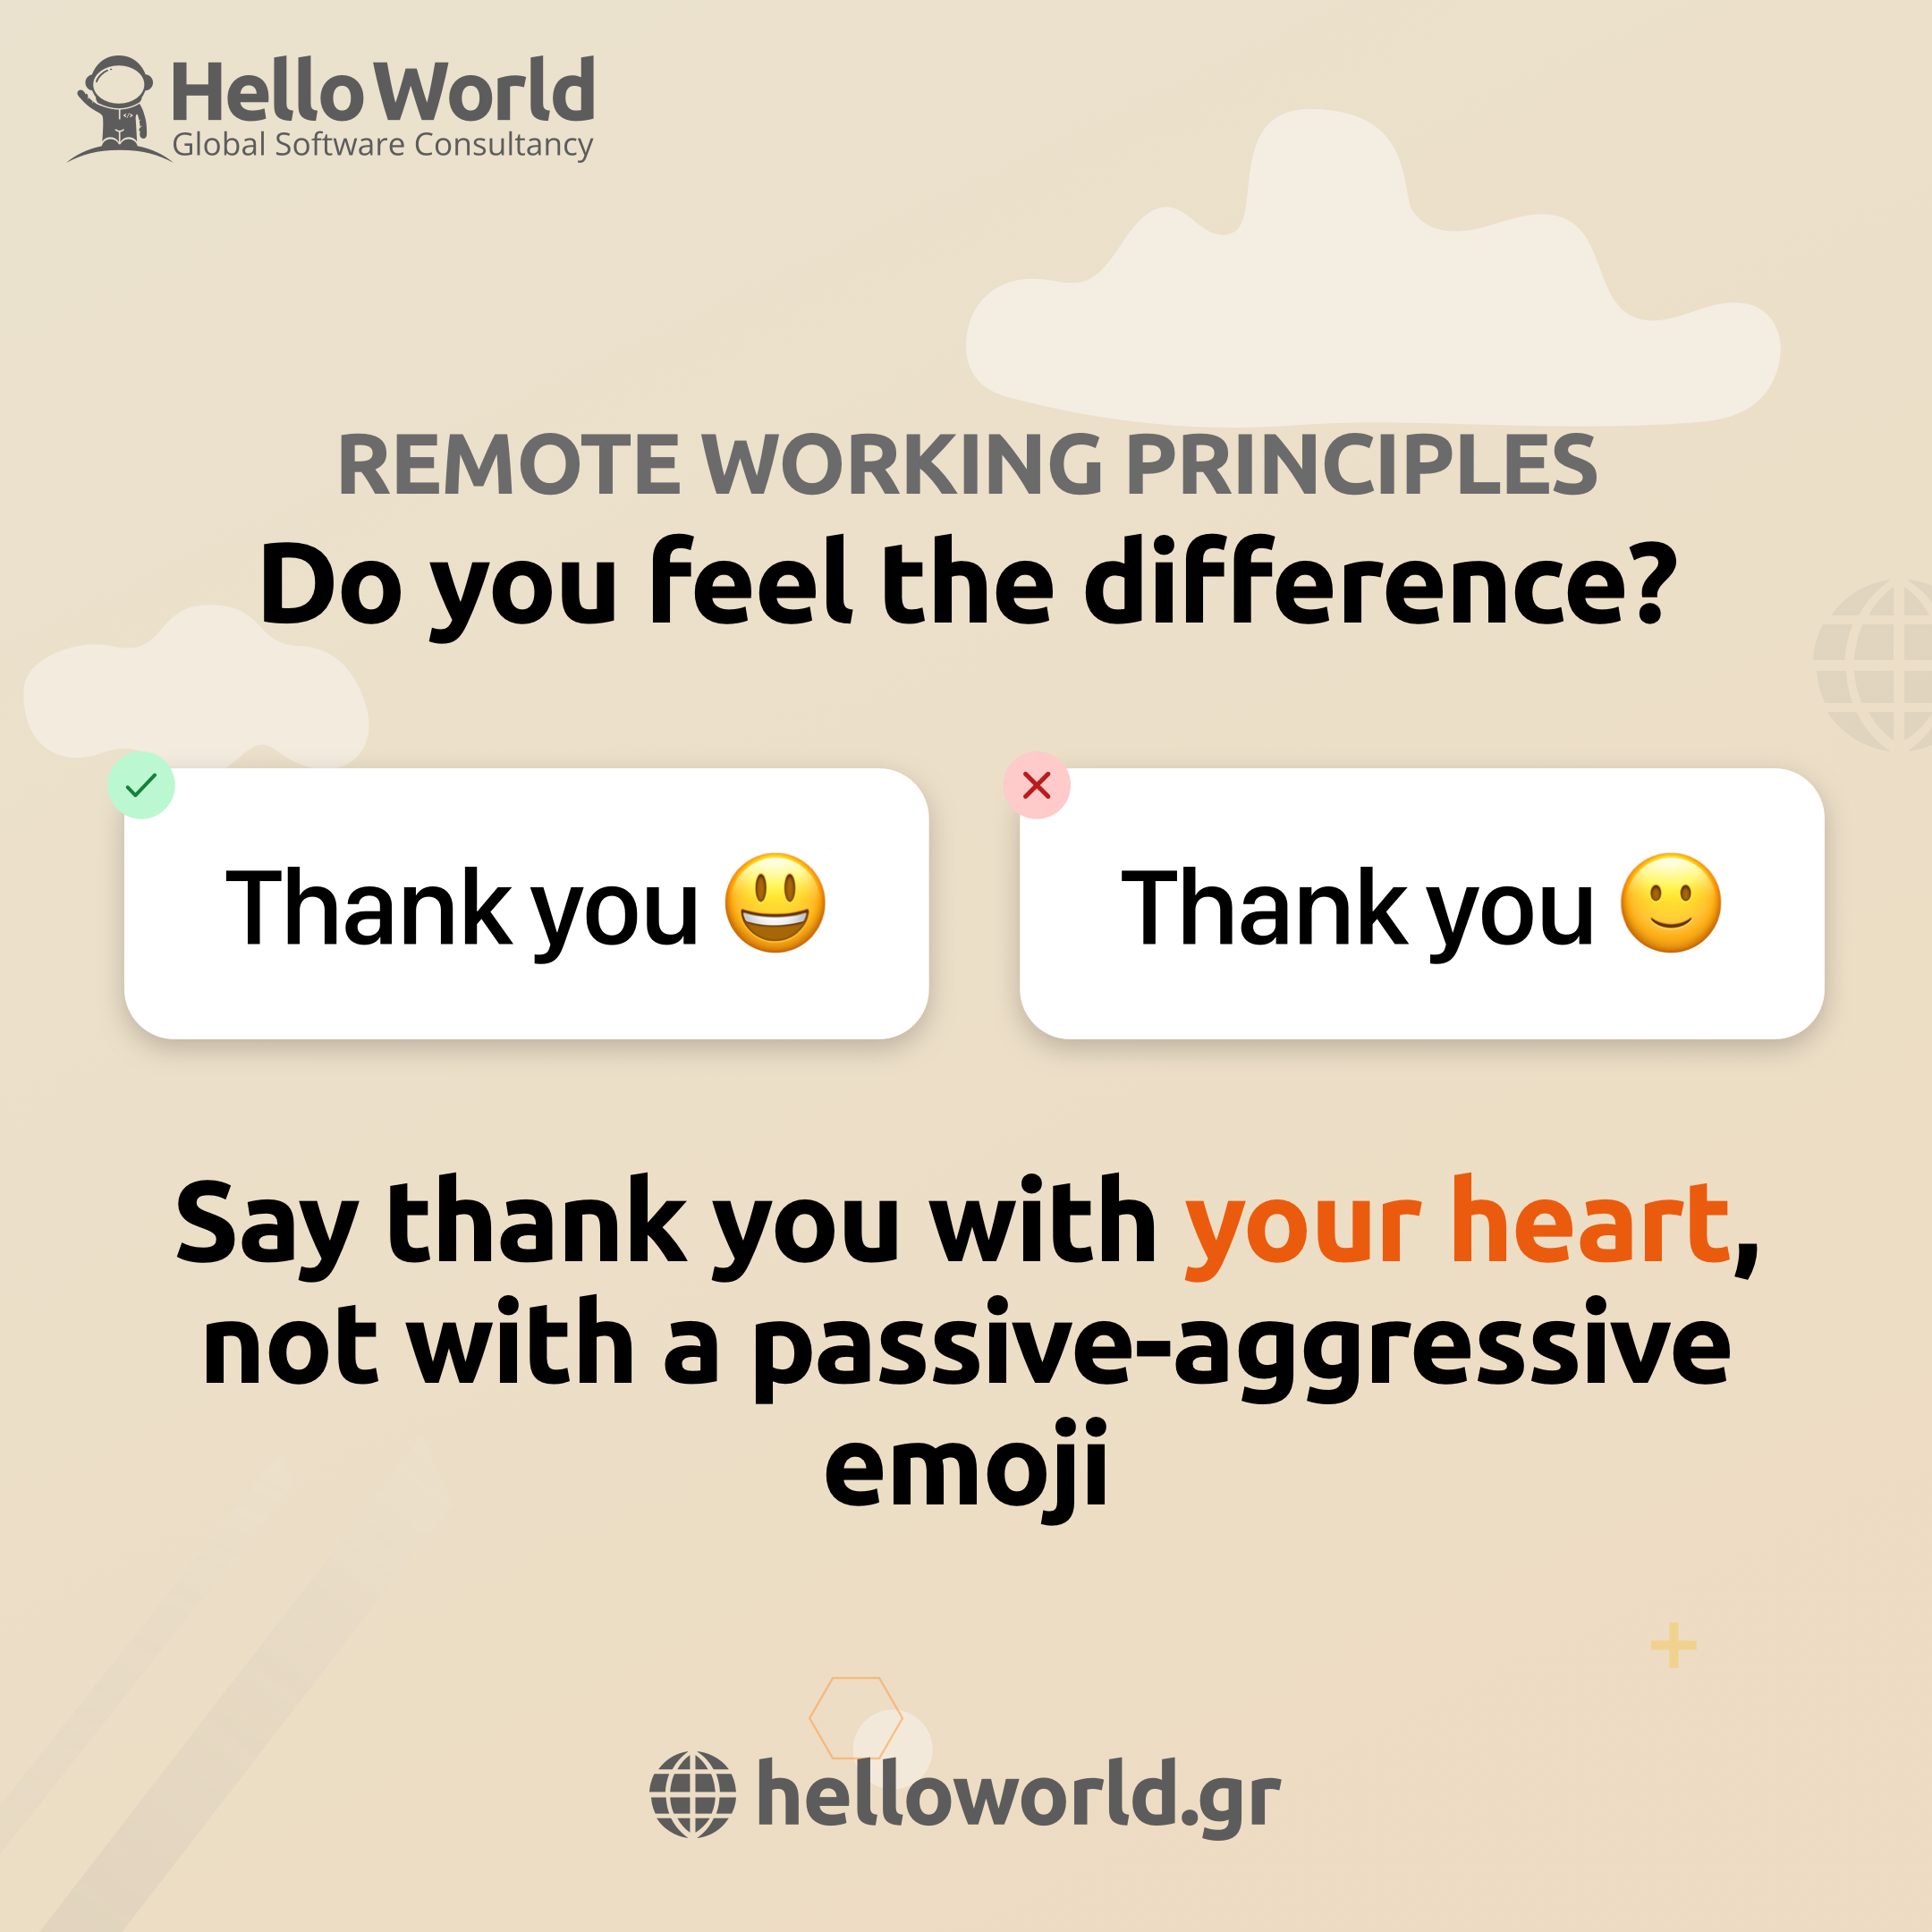 Avoid using cryptic or passive-aggressive expressions and emojis